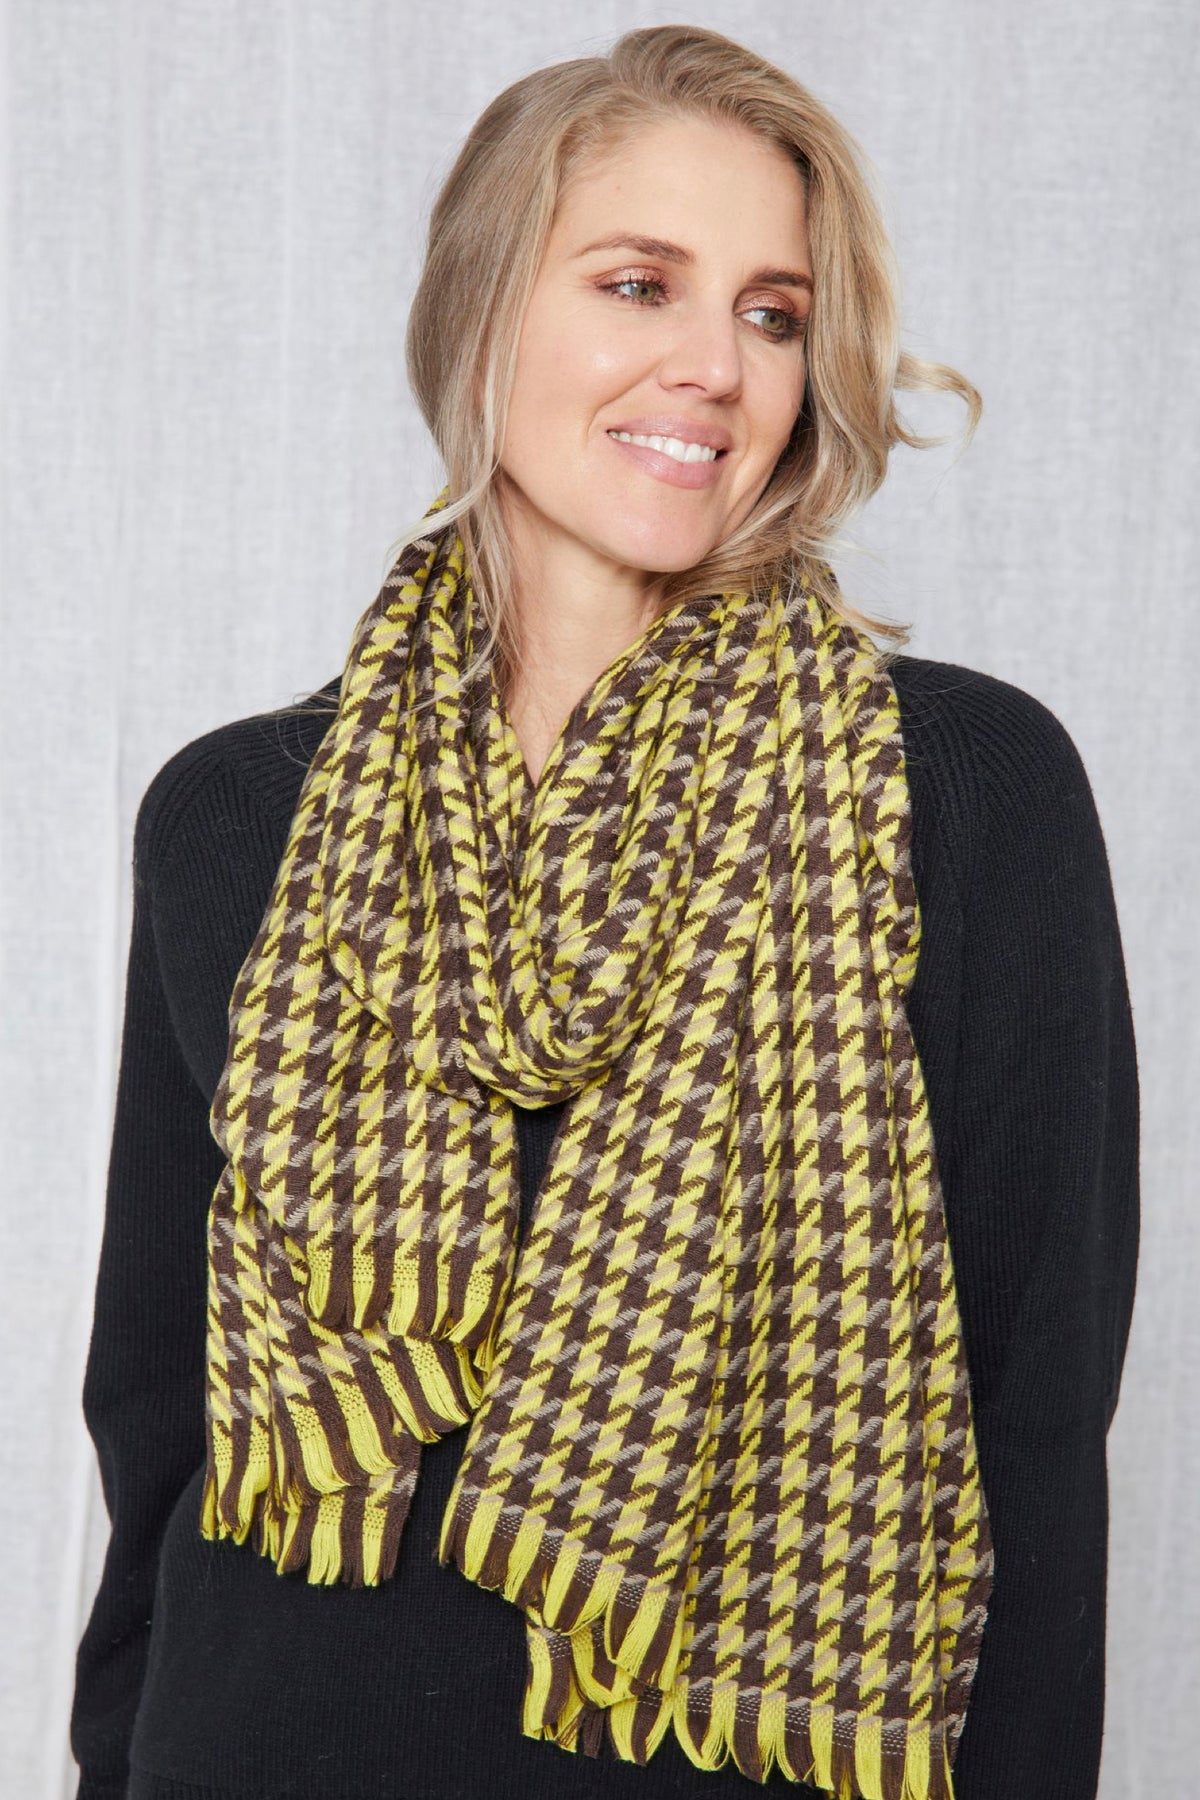 Tricolour Yellow Brown And Taupe Houndstooth Scarf